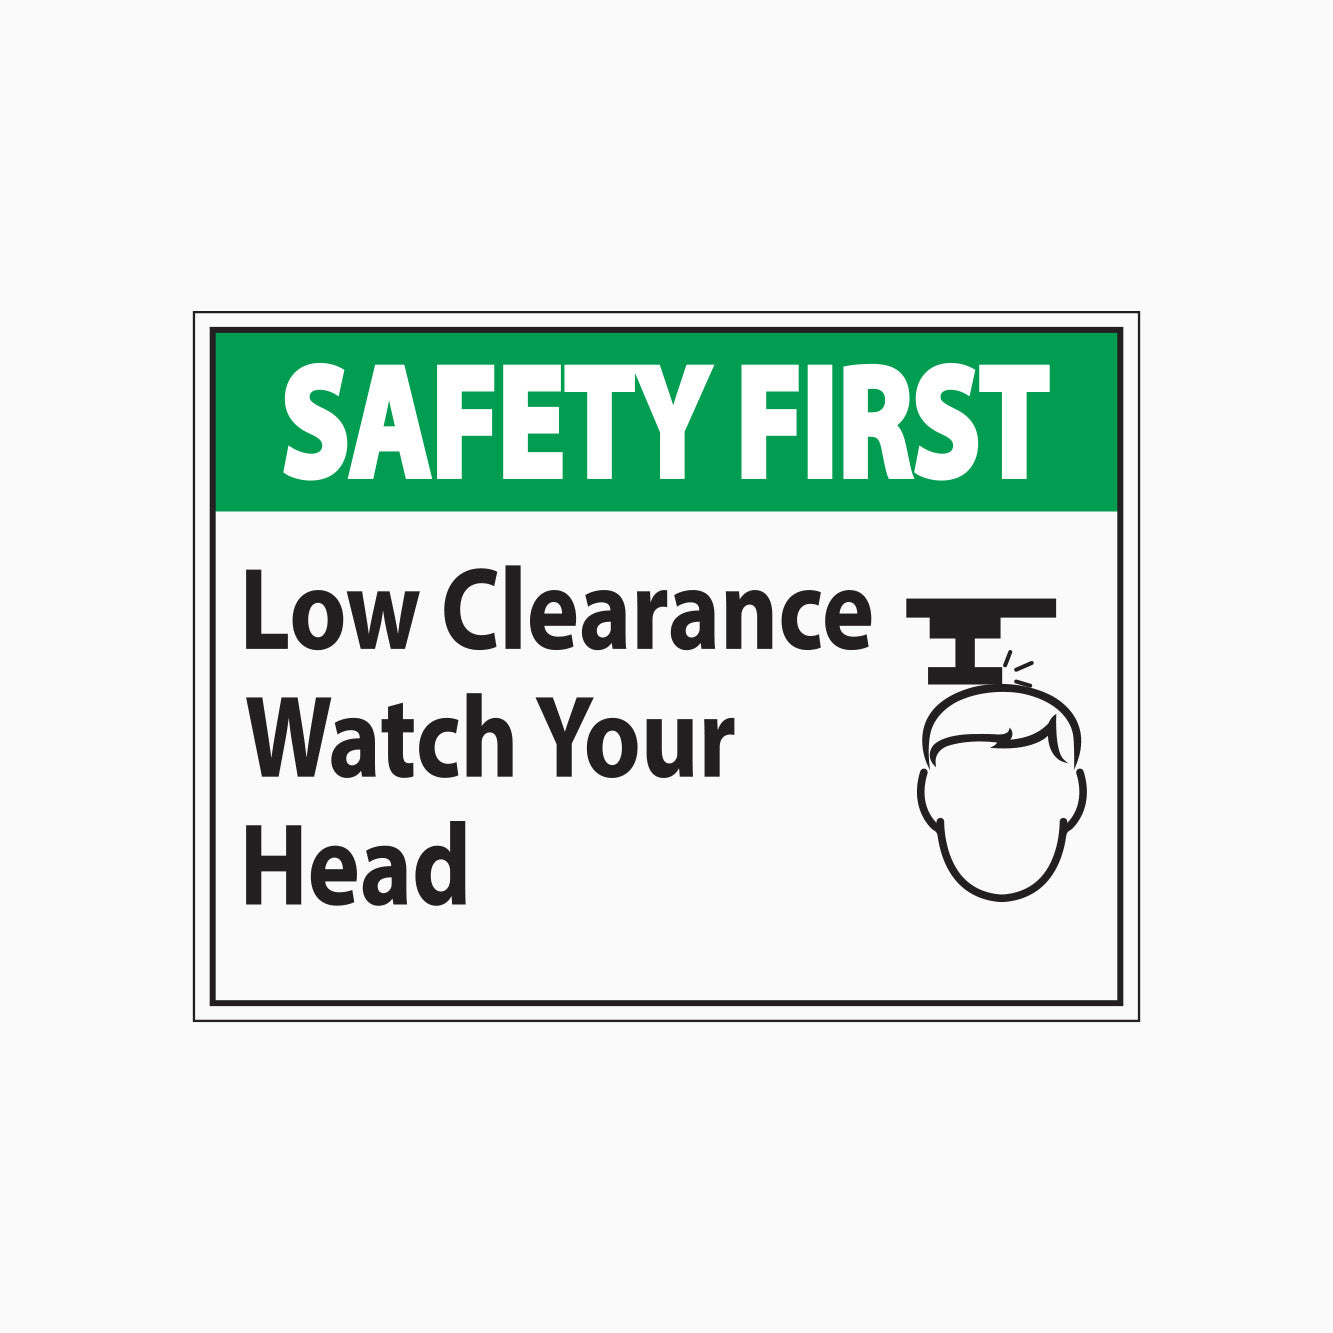 SAFETY FIRST SIGN - LOW CLEARANCE WATCH YOUR HEAD SIGN